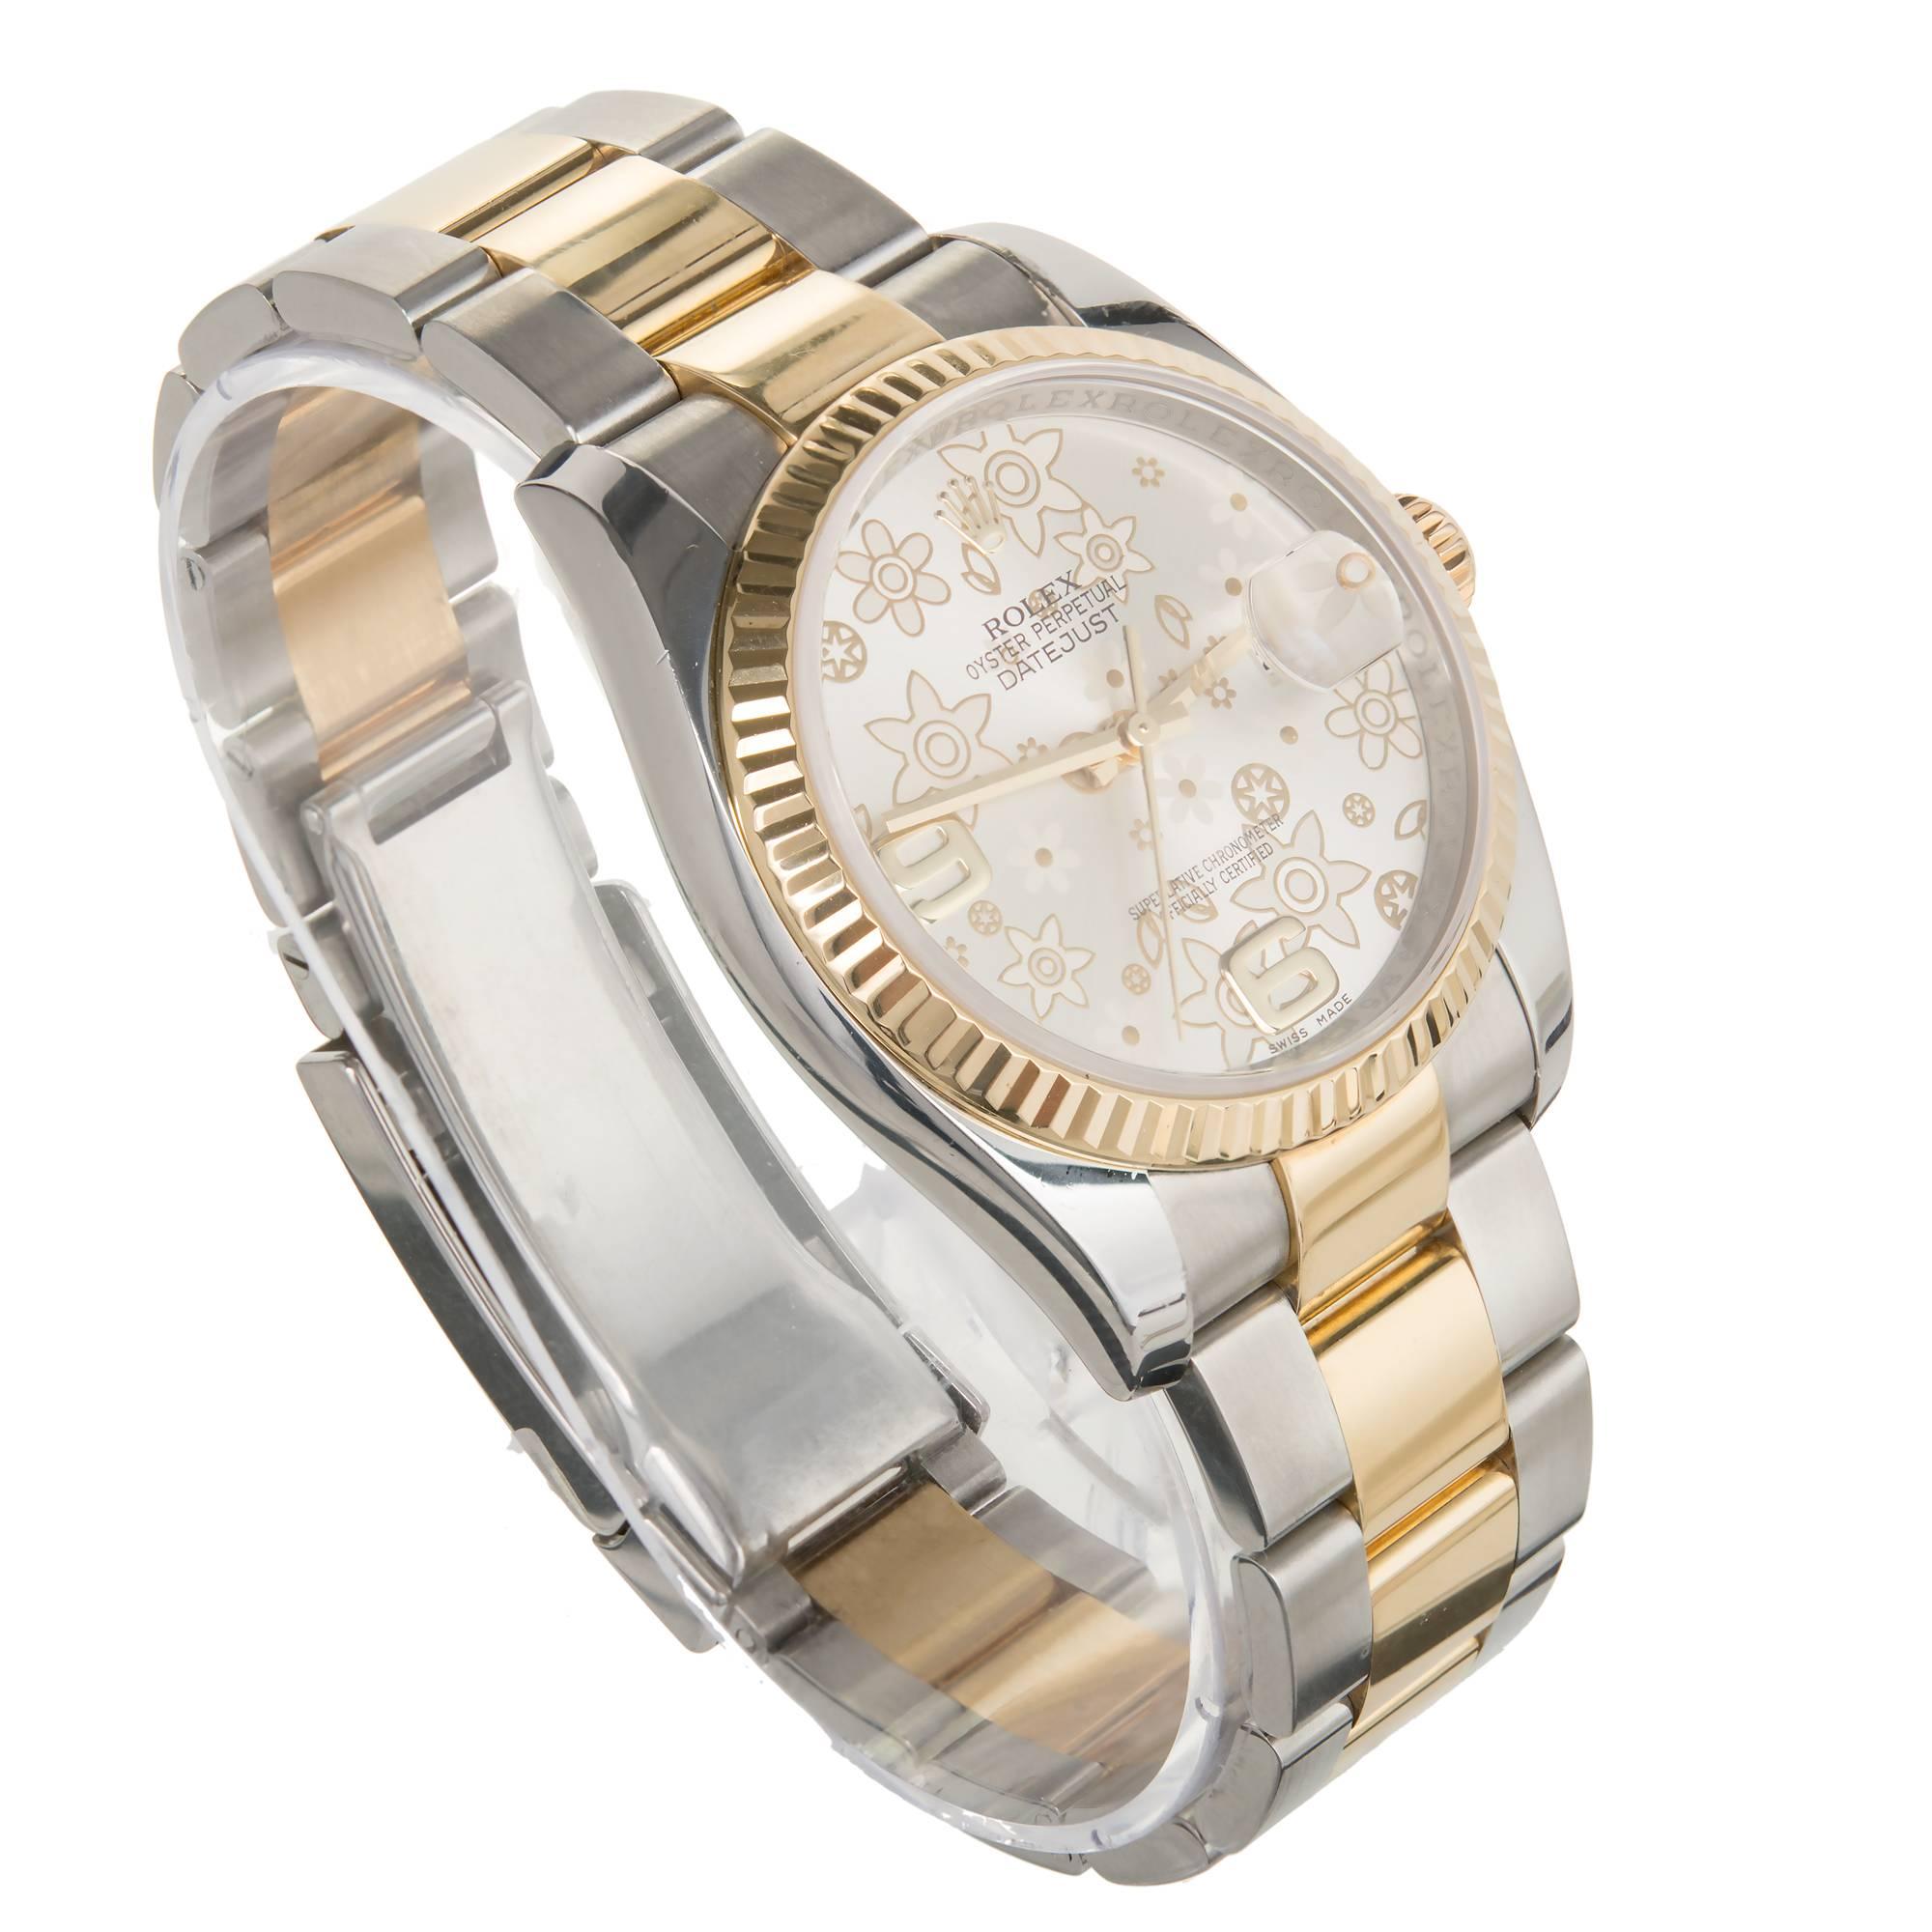 Rolex lady's stainless steel and 18k yellow gold wristwatch, Ref. 116233, with flower dial, Oyster bracelet with new-style adjustable band. Complete with box. Circa 2013.

Stainless Steel and 18k yellow gold 
Movement: Automatic 3135 3 3048437